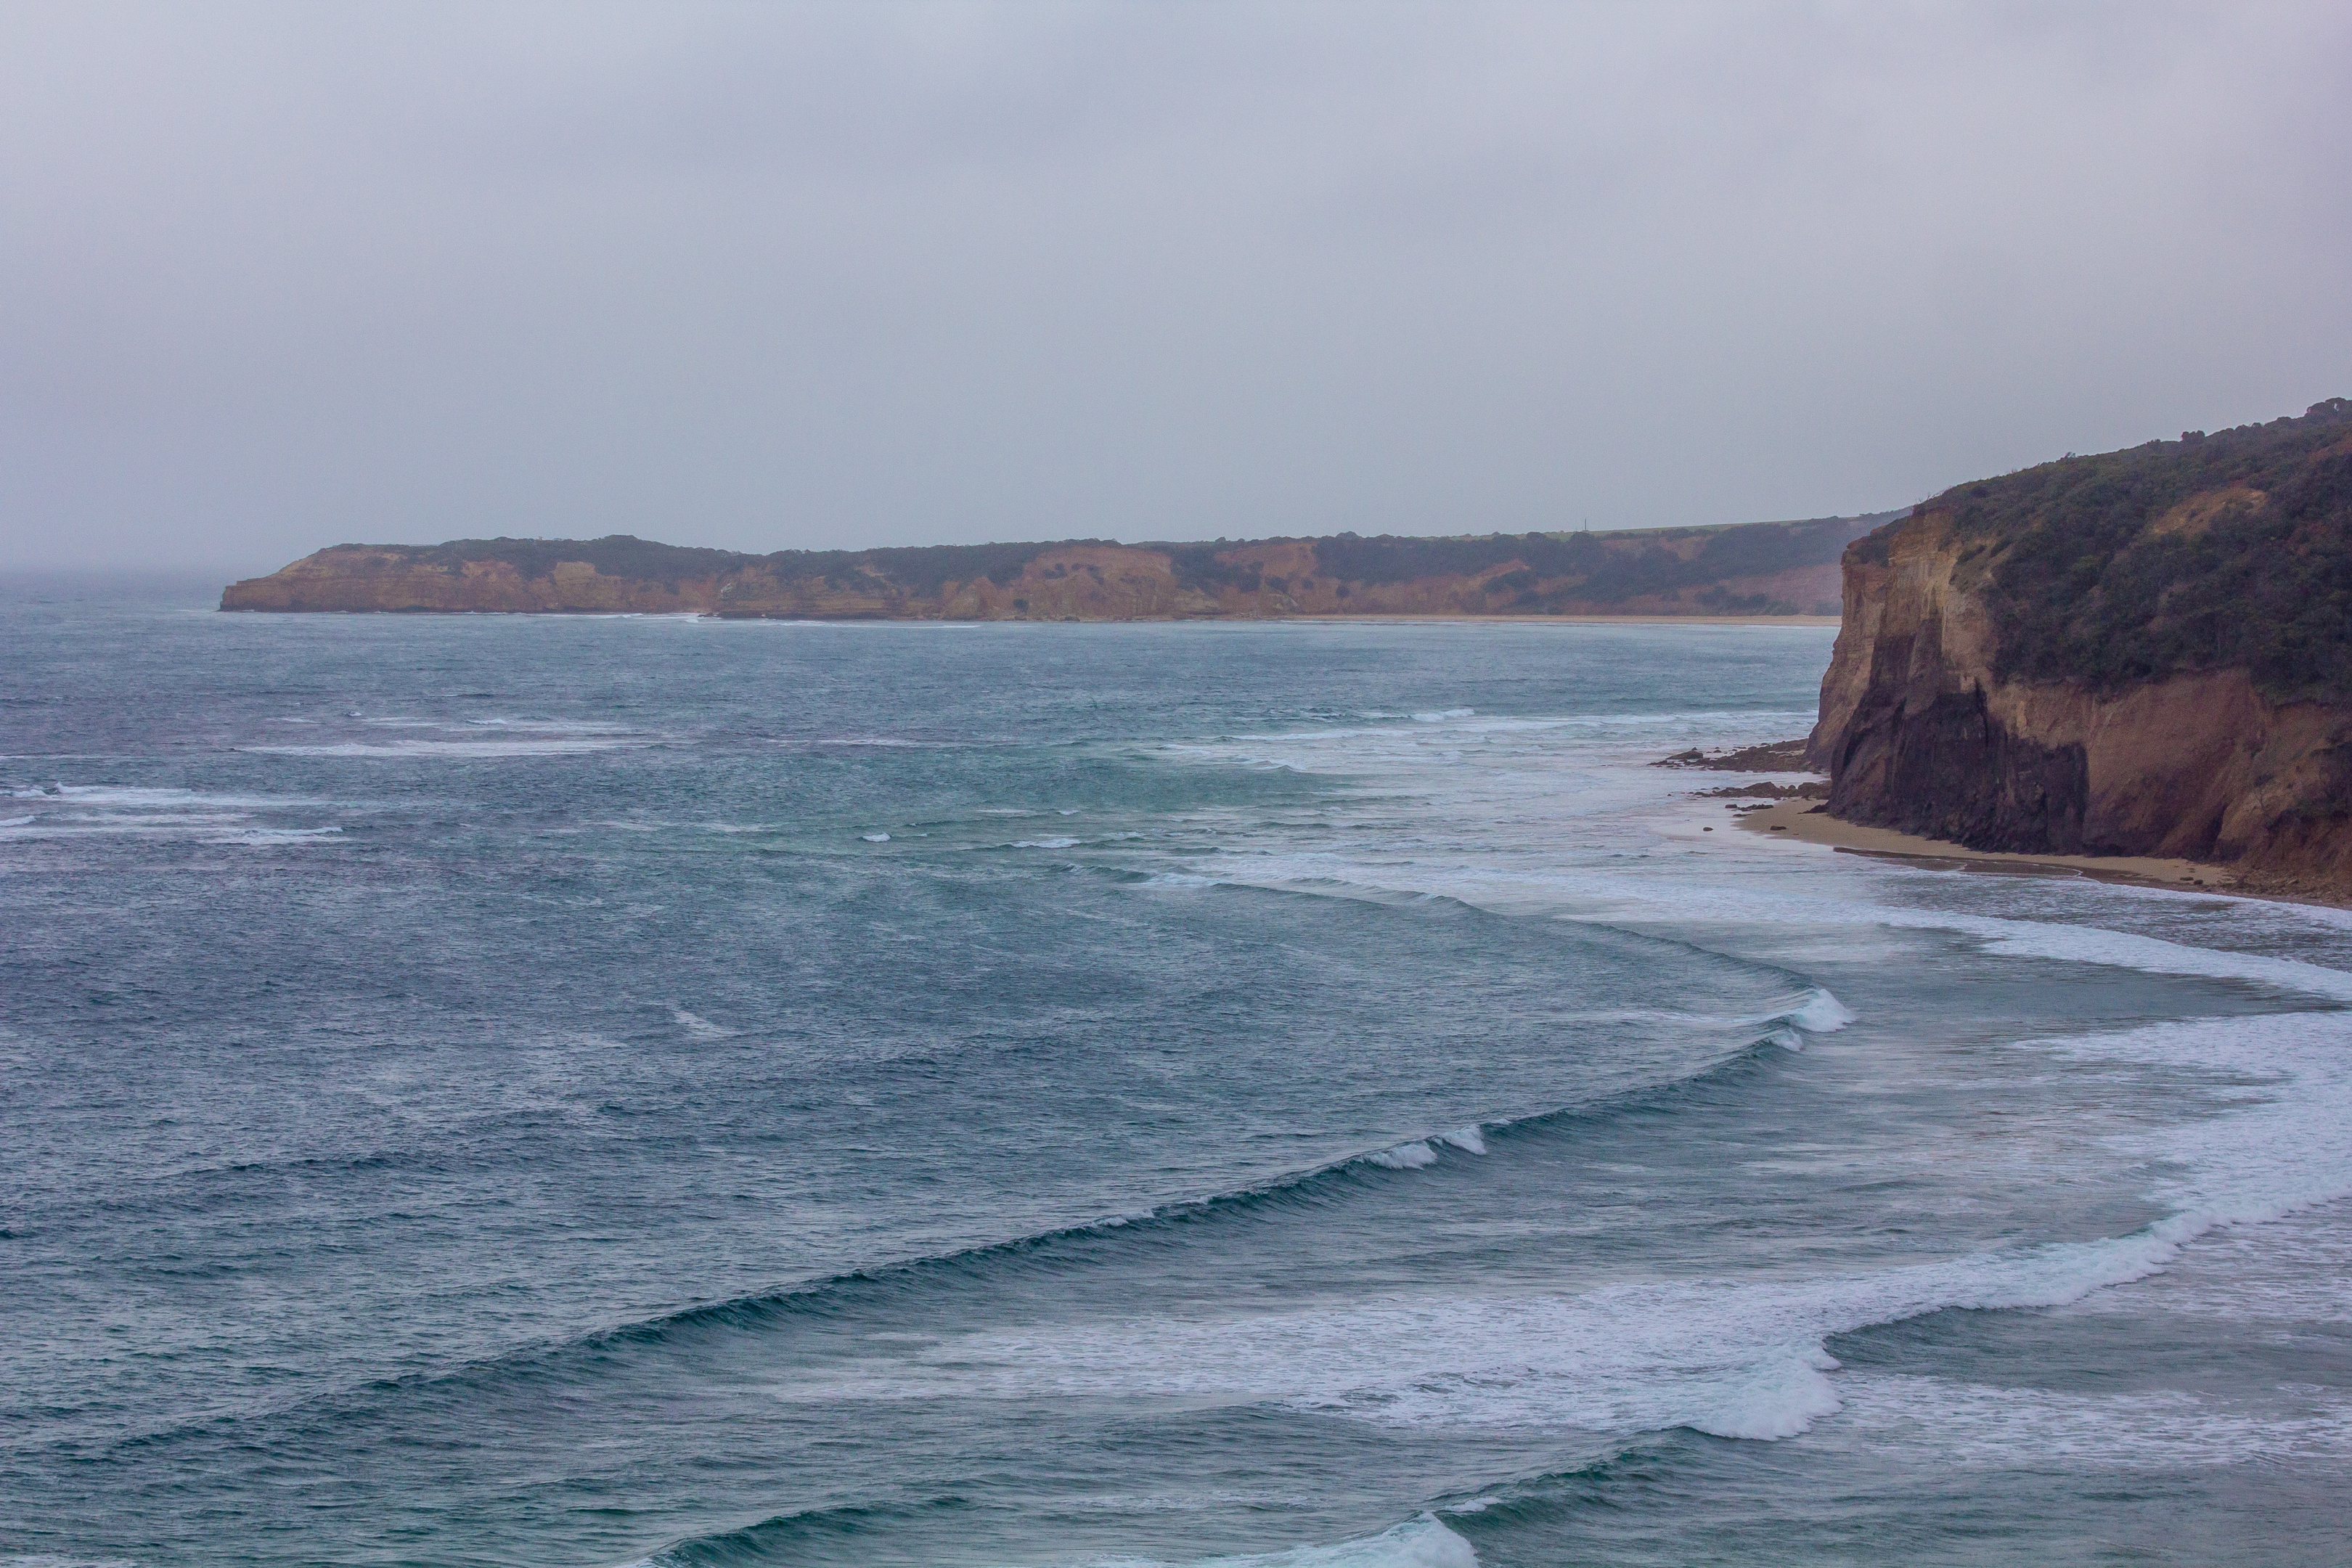  Djpain’s photo of Bells beach. Hamlan Homes Home and Land is etched along the surf coast and coastal road.